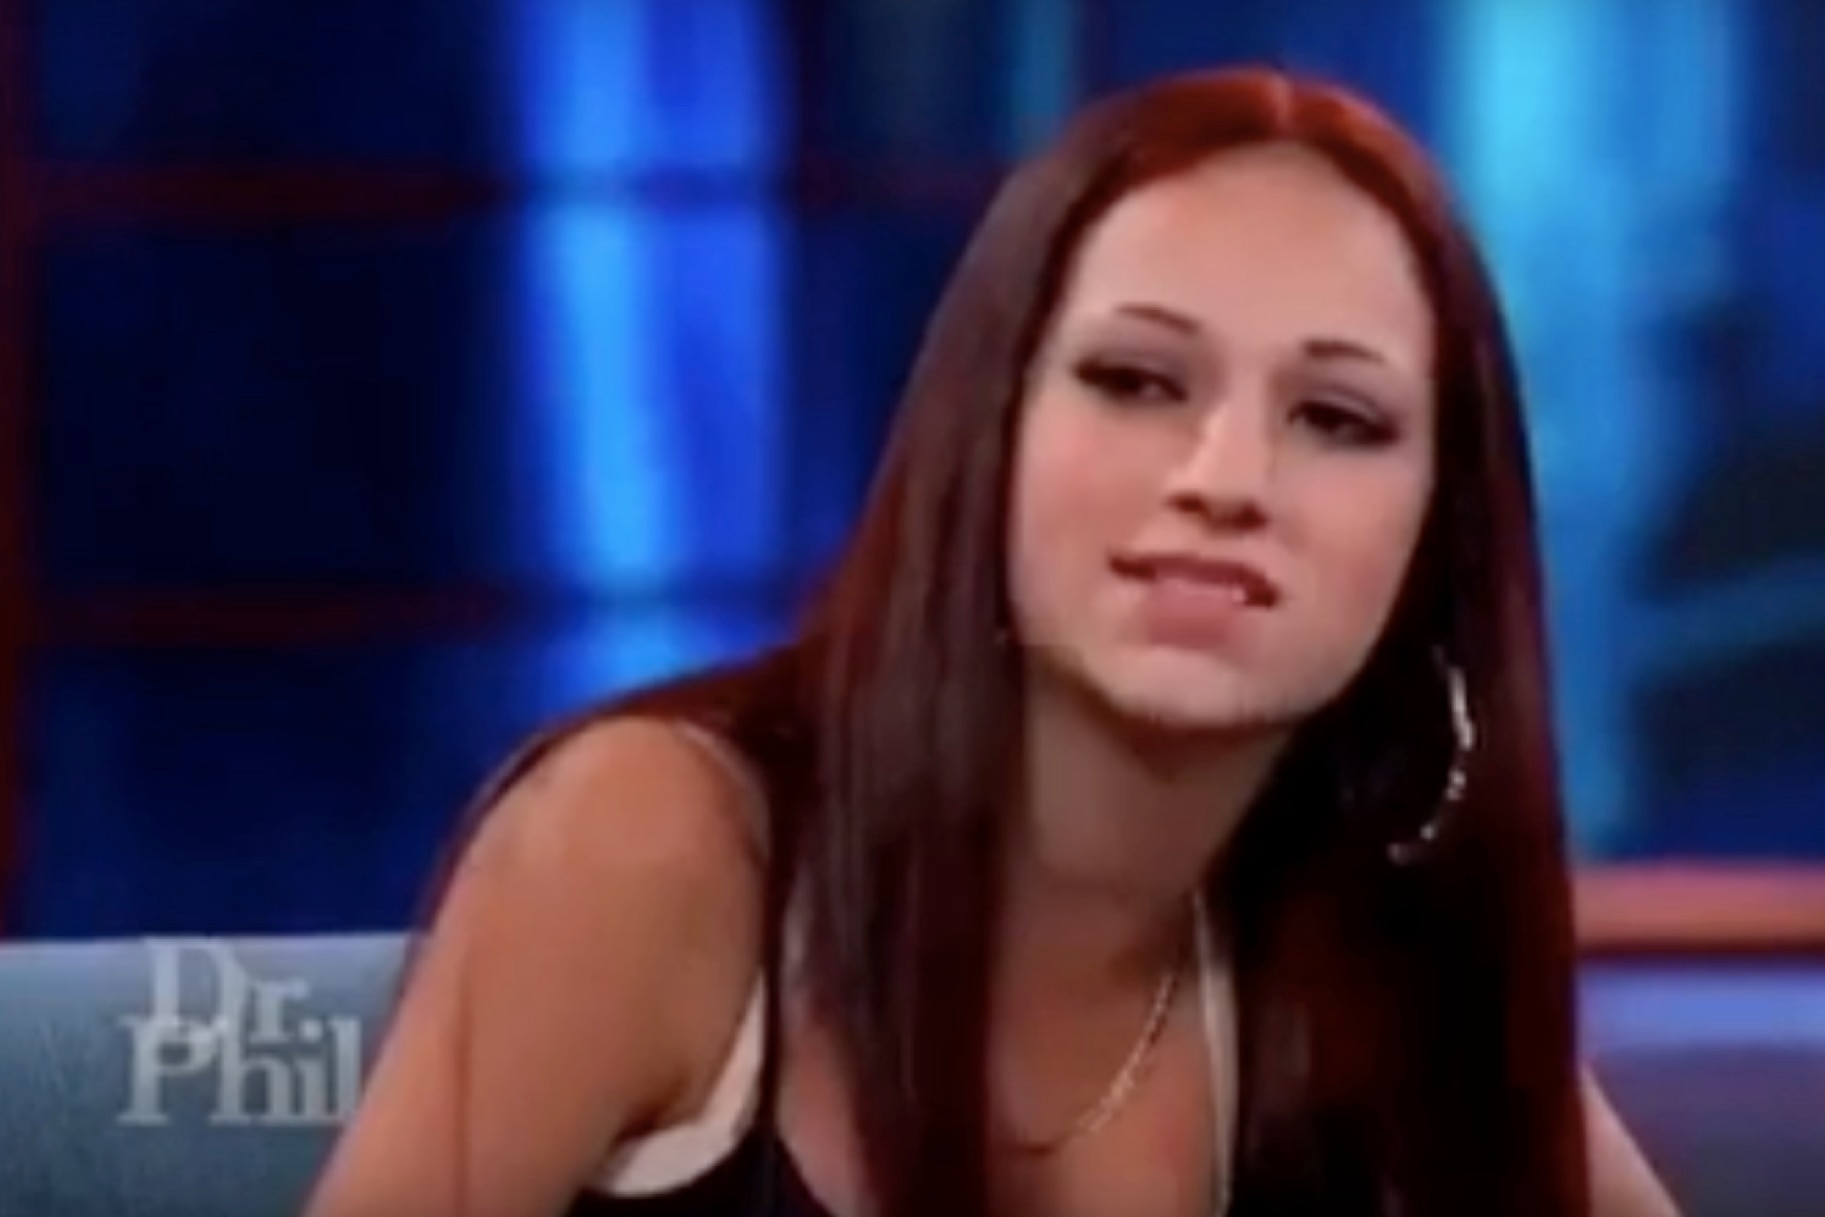 Viral Hood White Girl From Dr Phil Takes A Beatdown On Camera Very Real